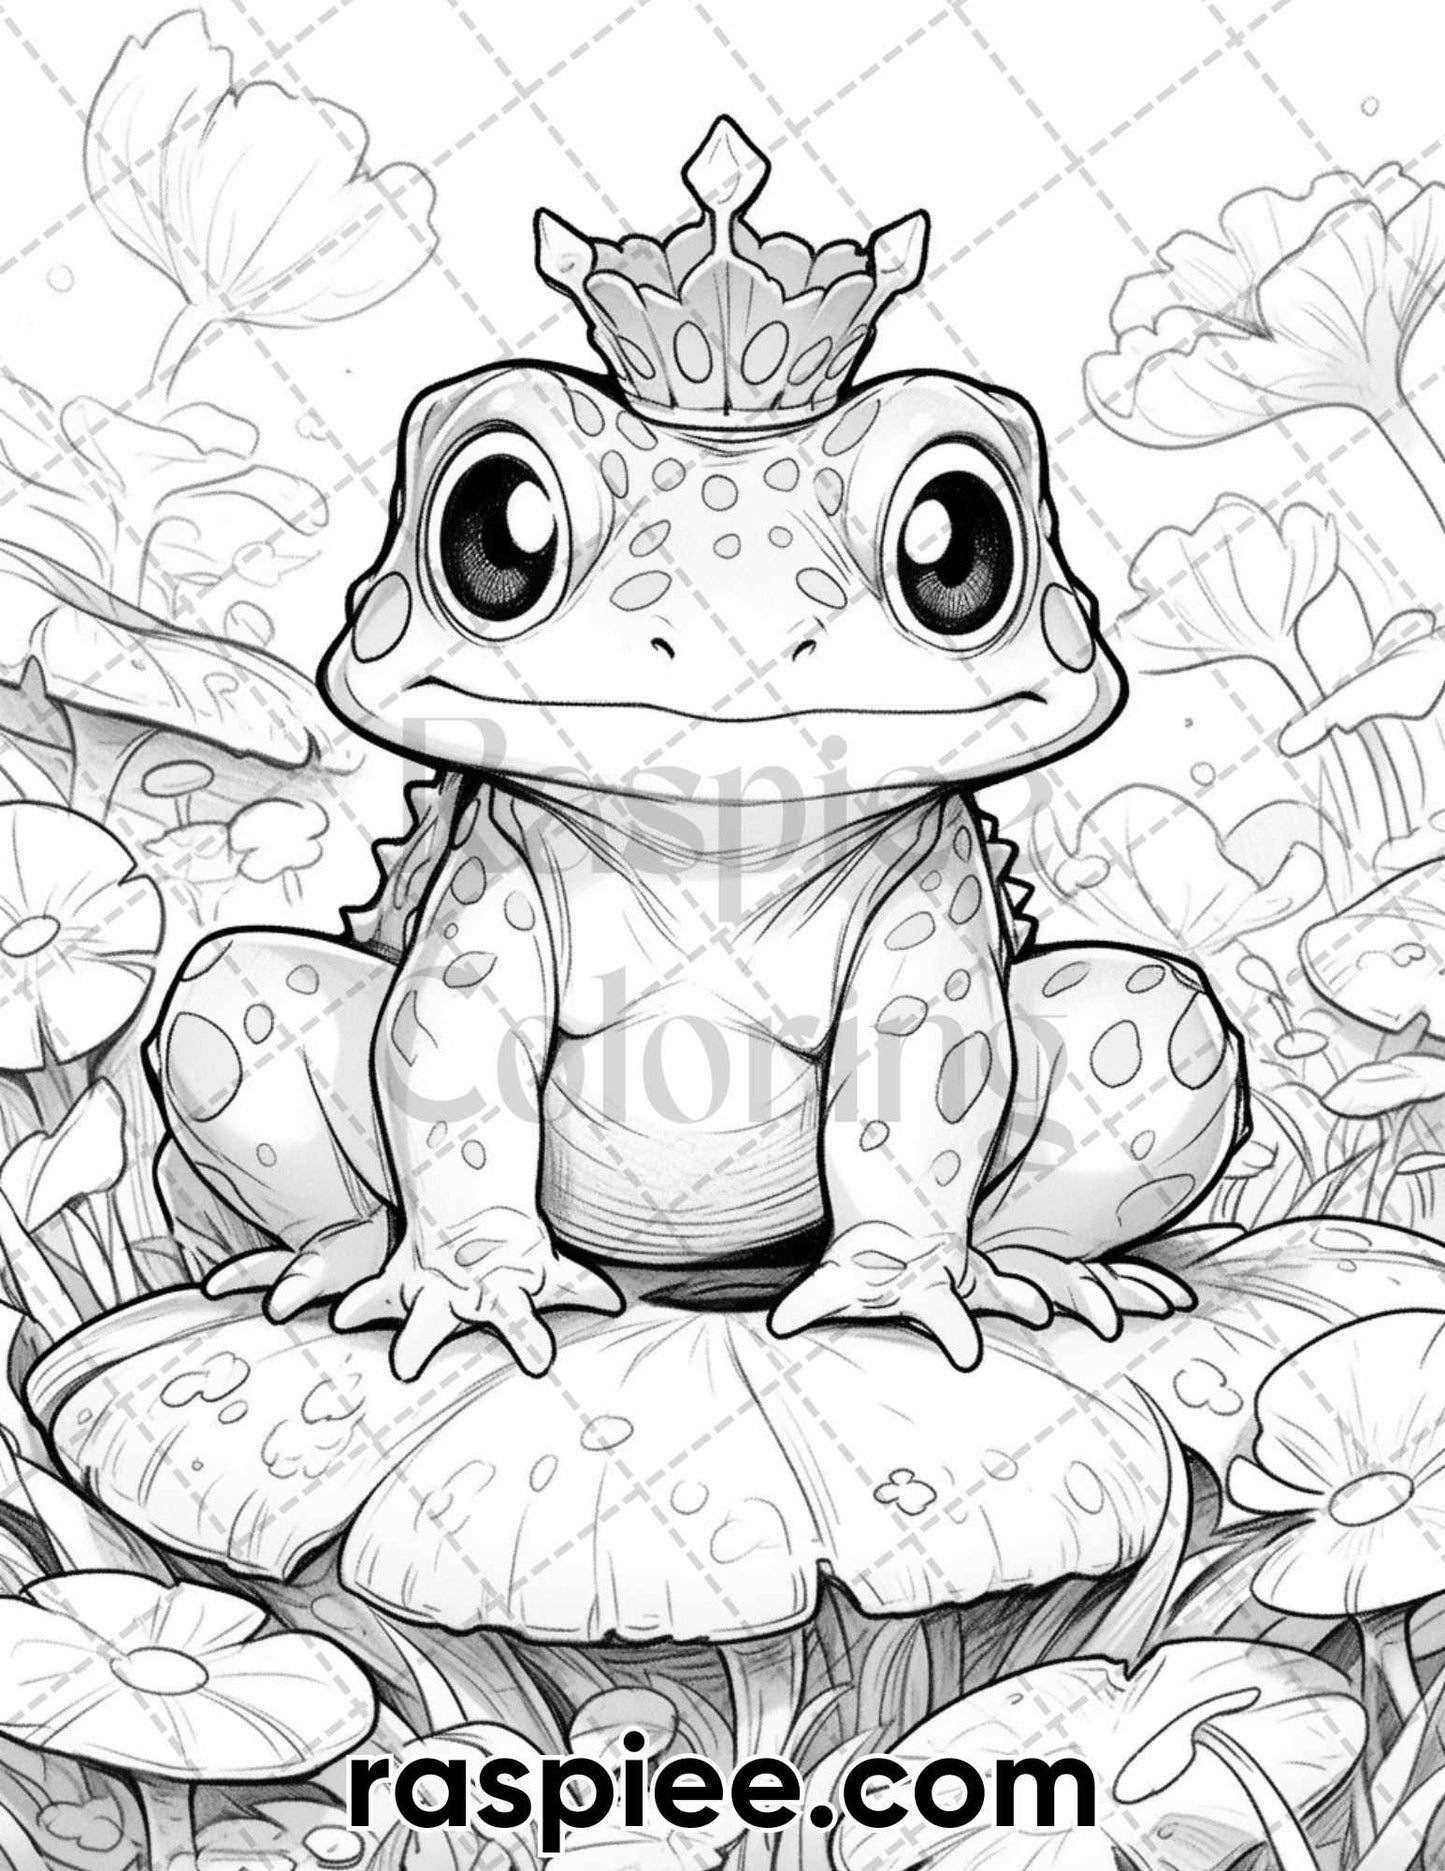 Frog Kingdom Grayscale Coloring Page, Stress Relief Coloring Page, Nature-Inspired Coloring Book, Digital Download Coloring Page, Detailed Frog Coloring Sheet, Animal Coloring Pages, Frog Coloring Pages, Fantasy Coloring Pages